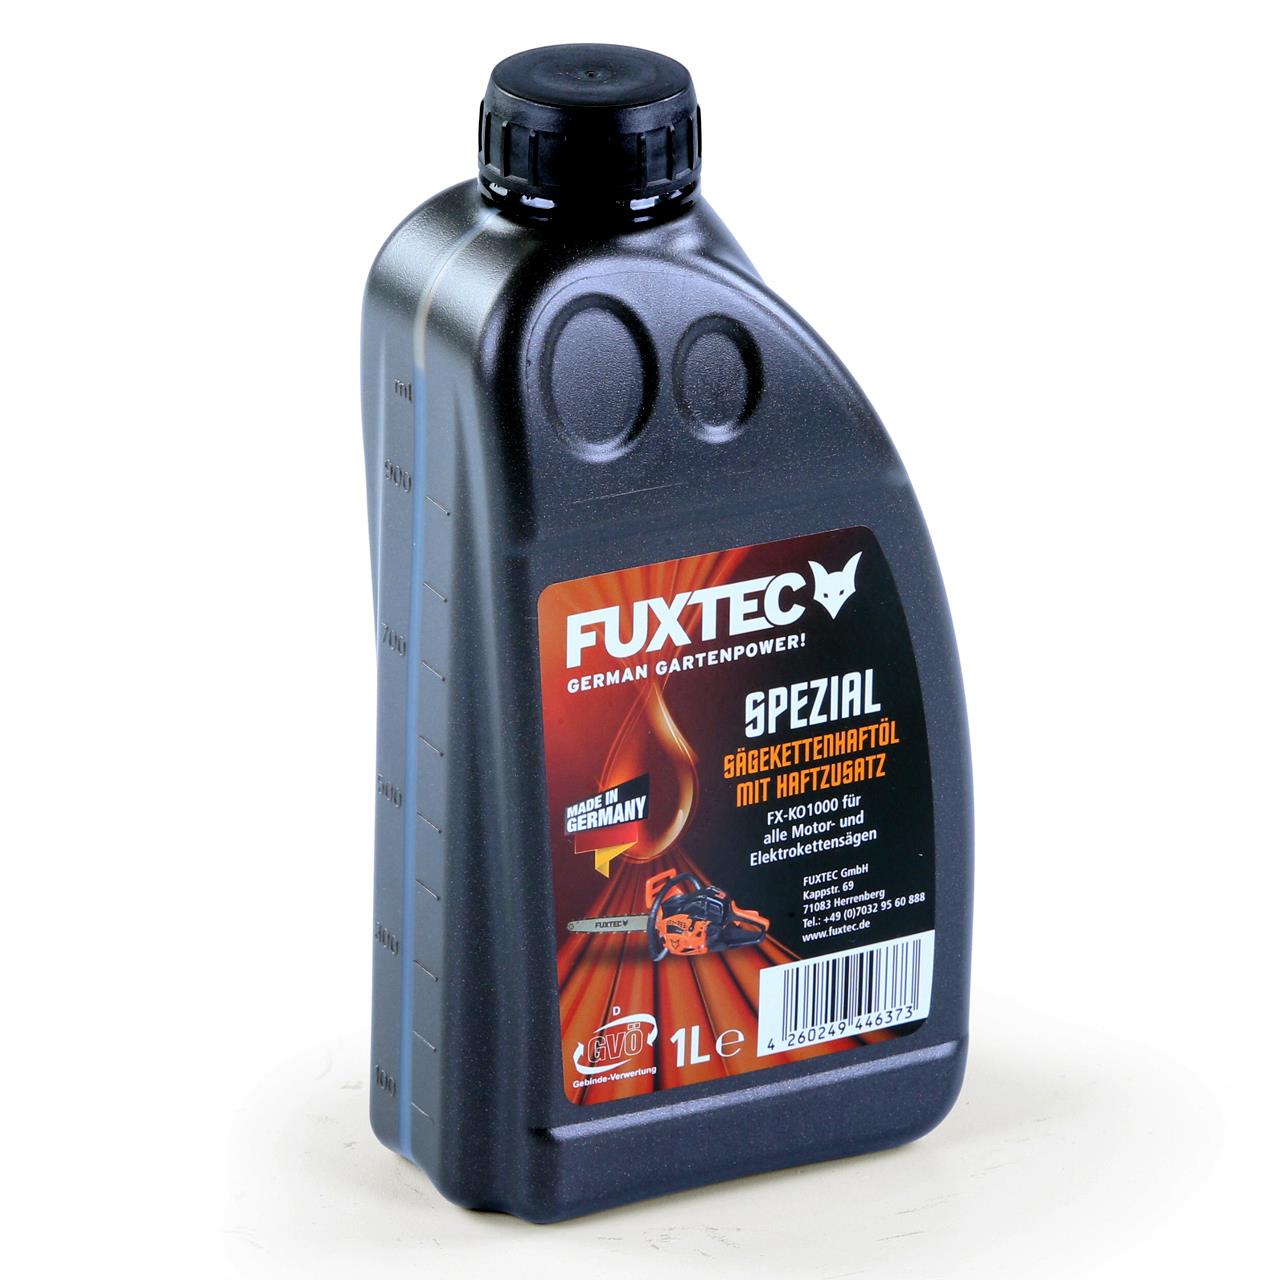 1 litre "Special" mineral saw-chain adhesive-oil FUXTEC KO1000